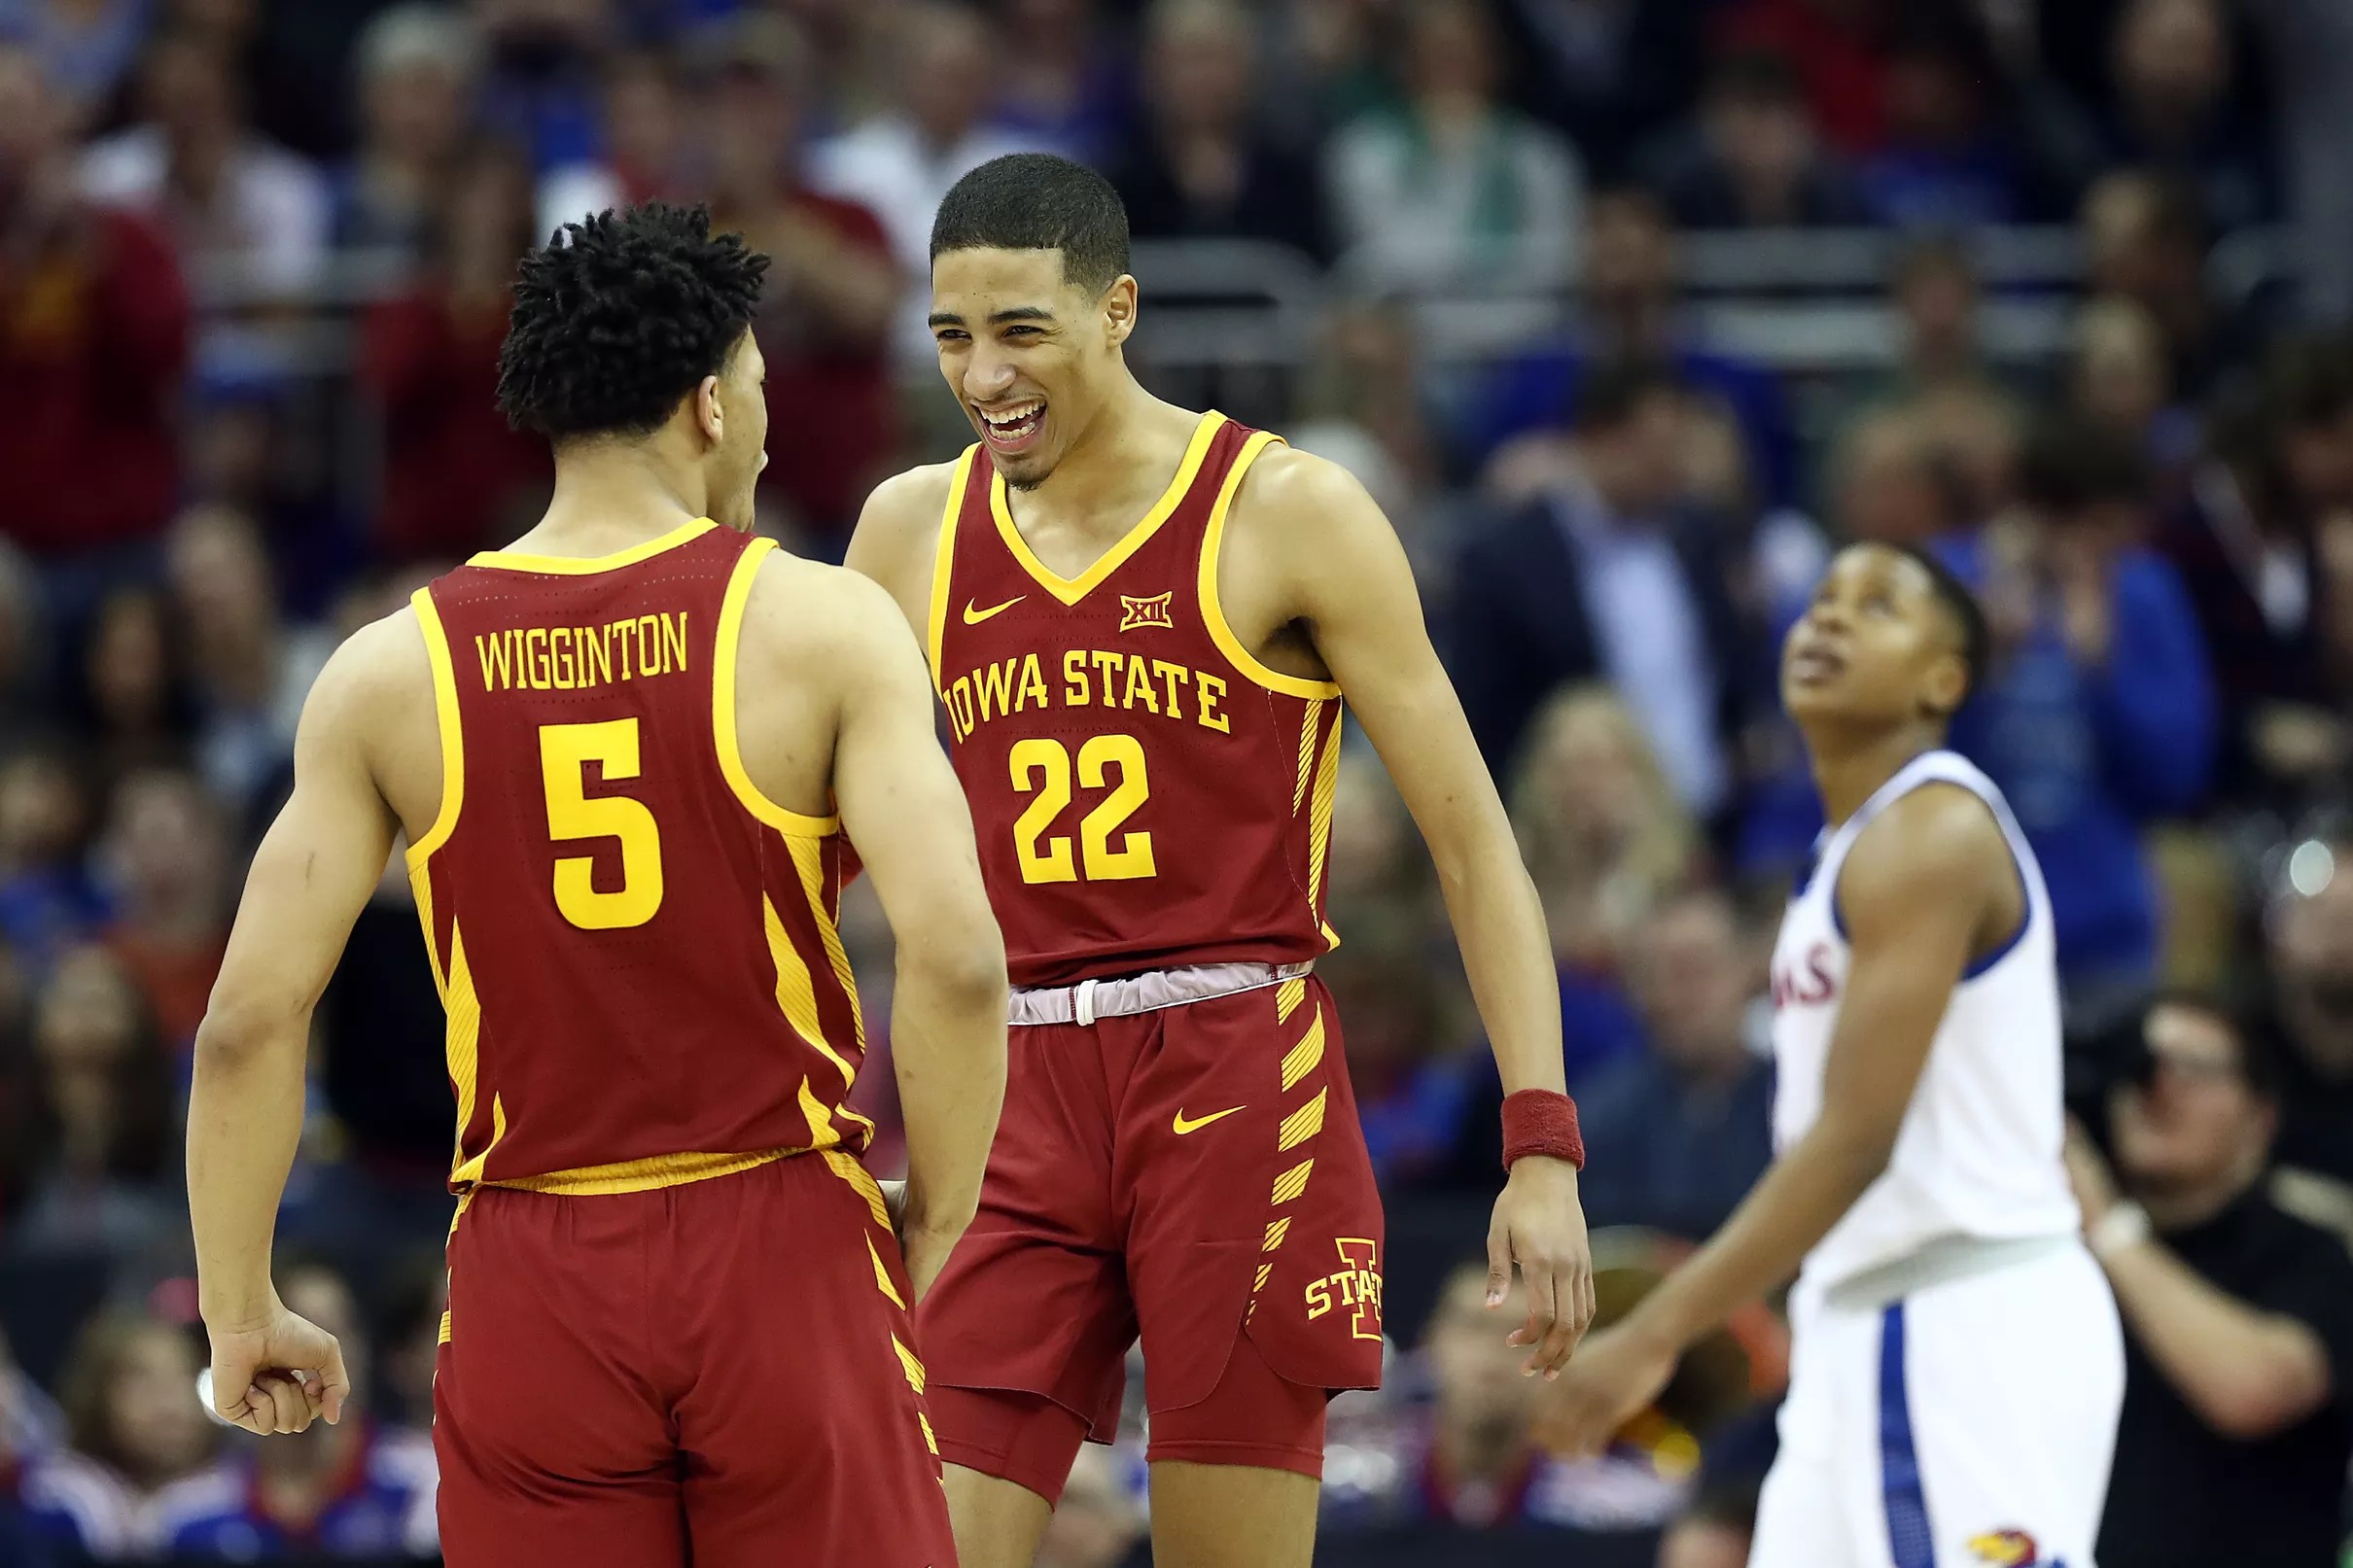 royals-review-2019-ncaa-march-madness-bracket-challenge